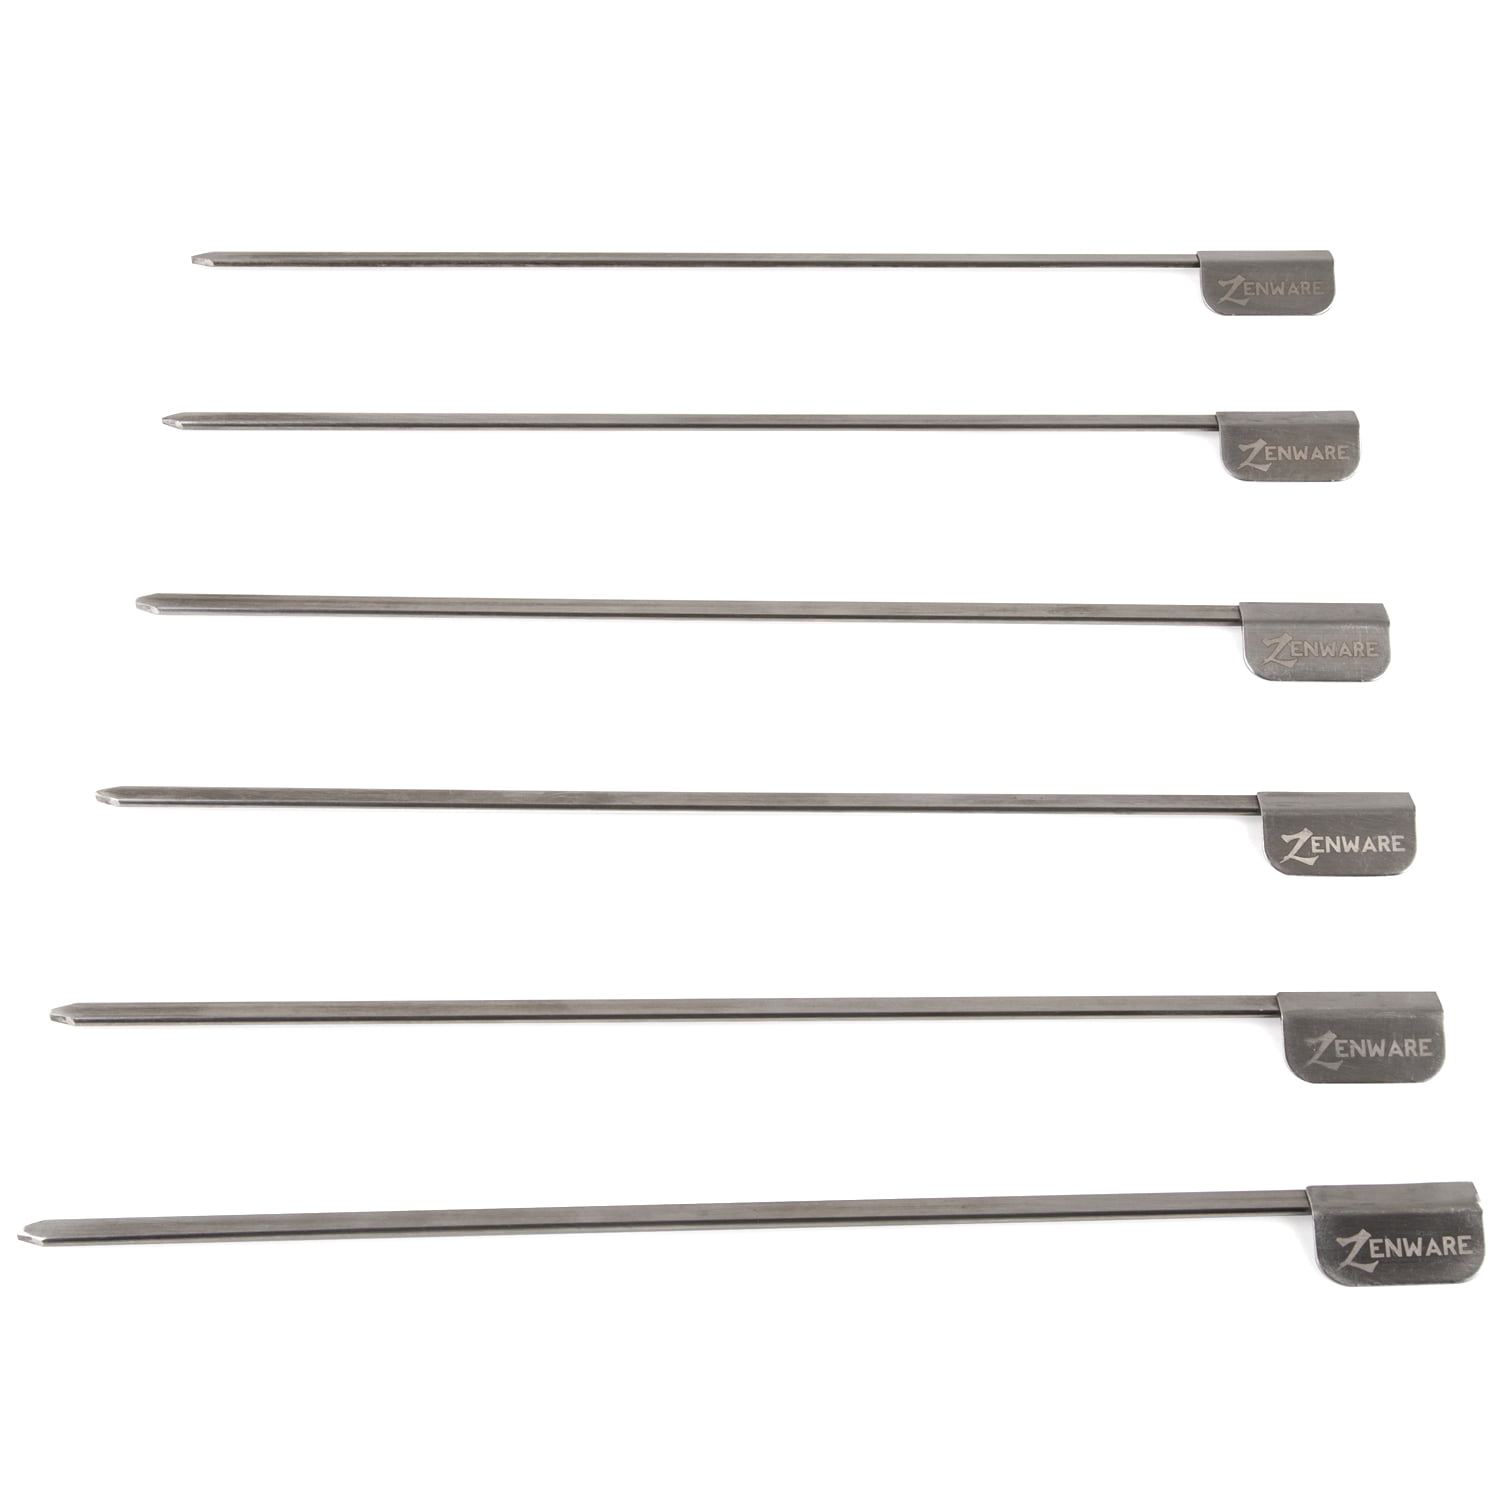 Zenware Stainless Steel Barbecue Kabob Skewers and Rack Set for BBQ Shish Kebab